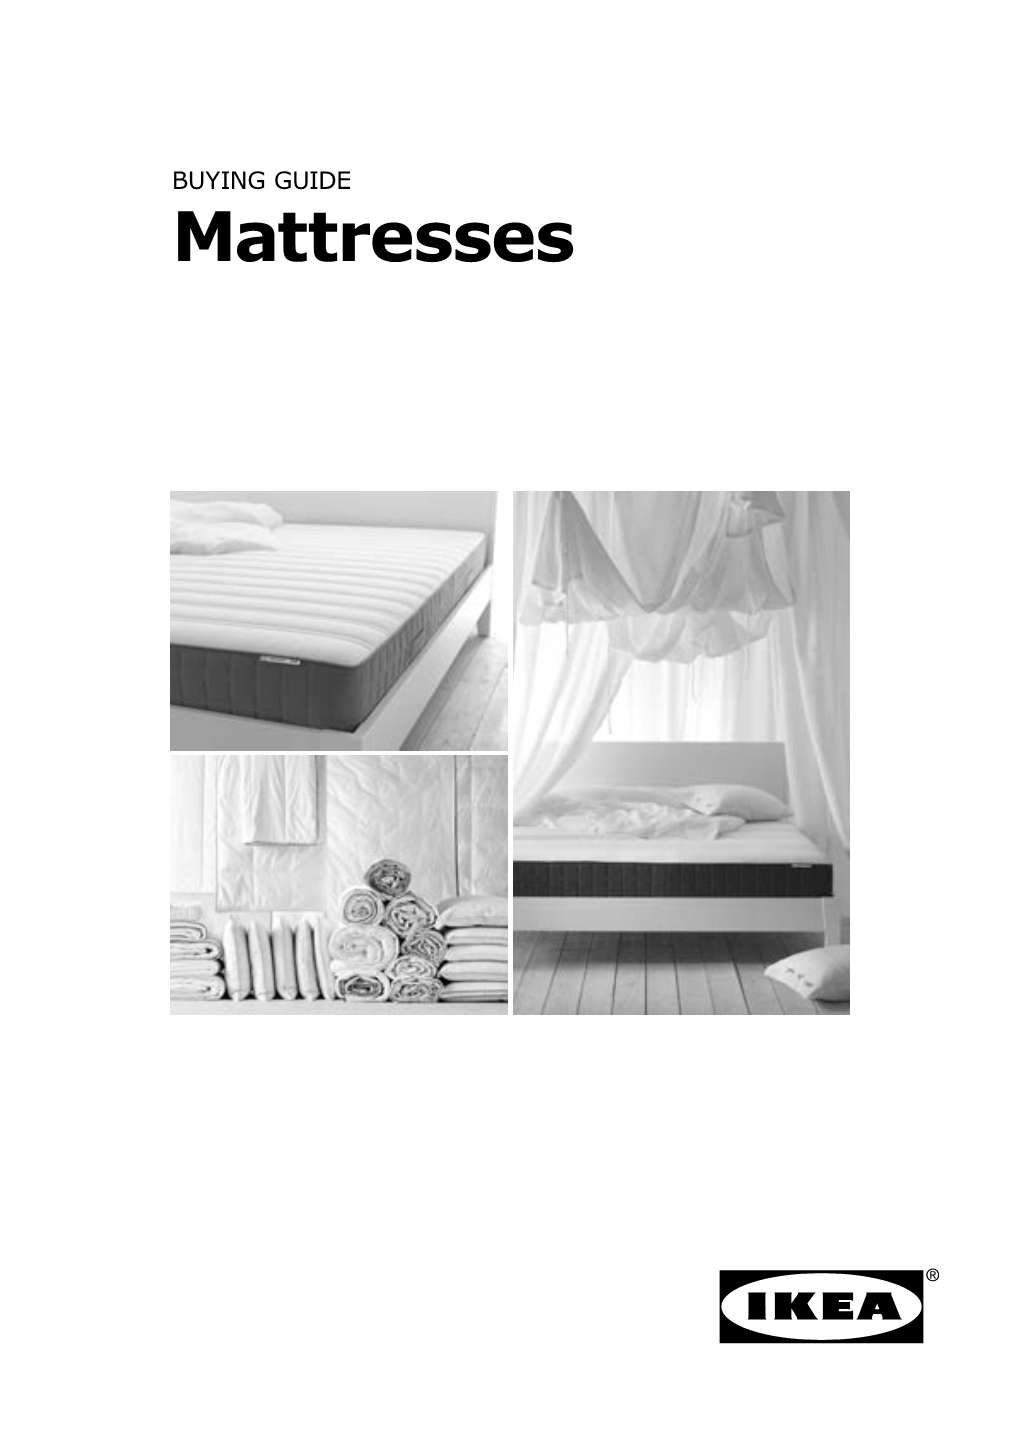 Mattresses Find Your Comfort! Good Night, Everyone Explanation of Symbols